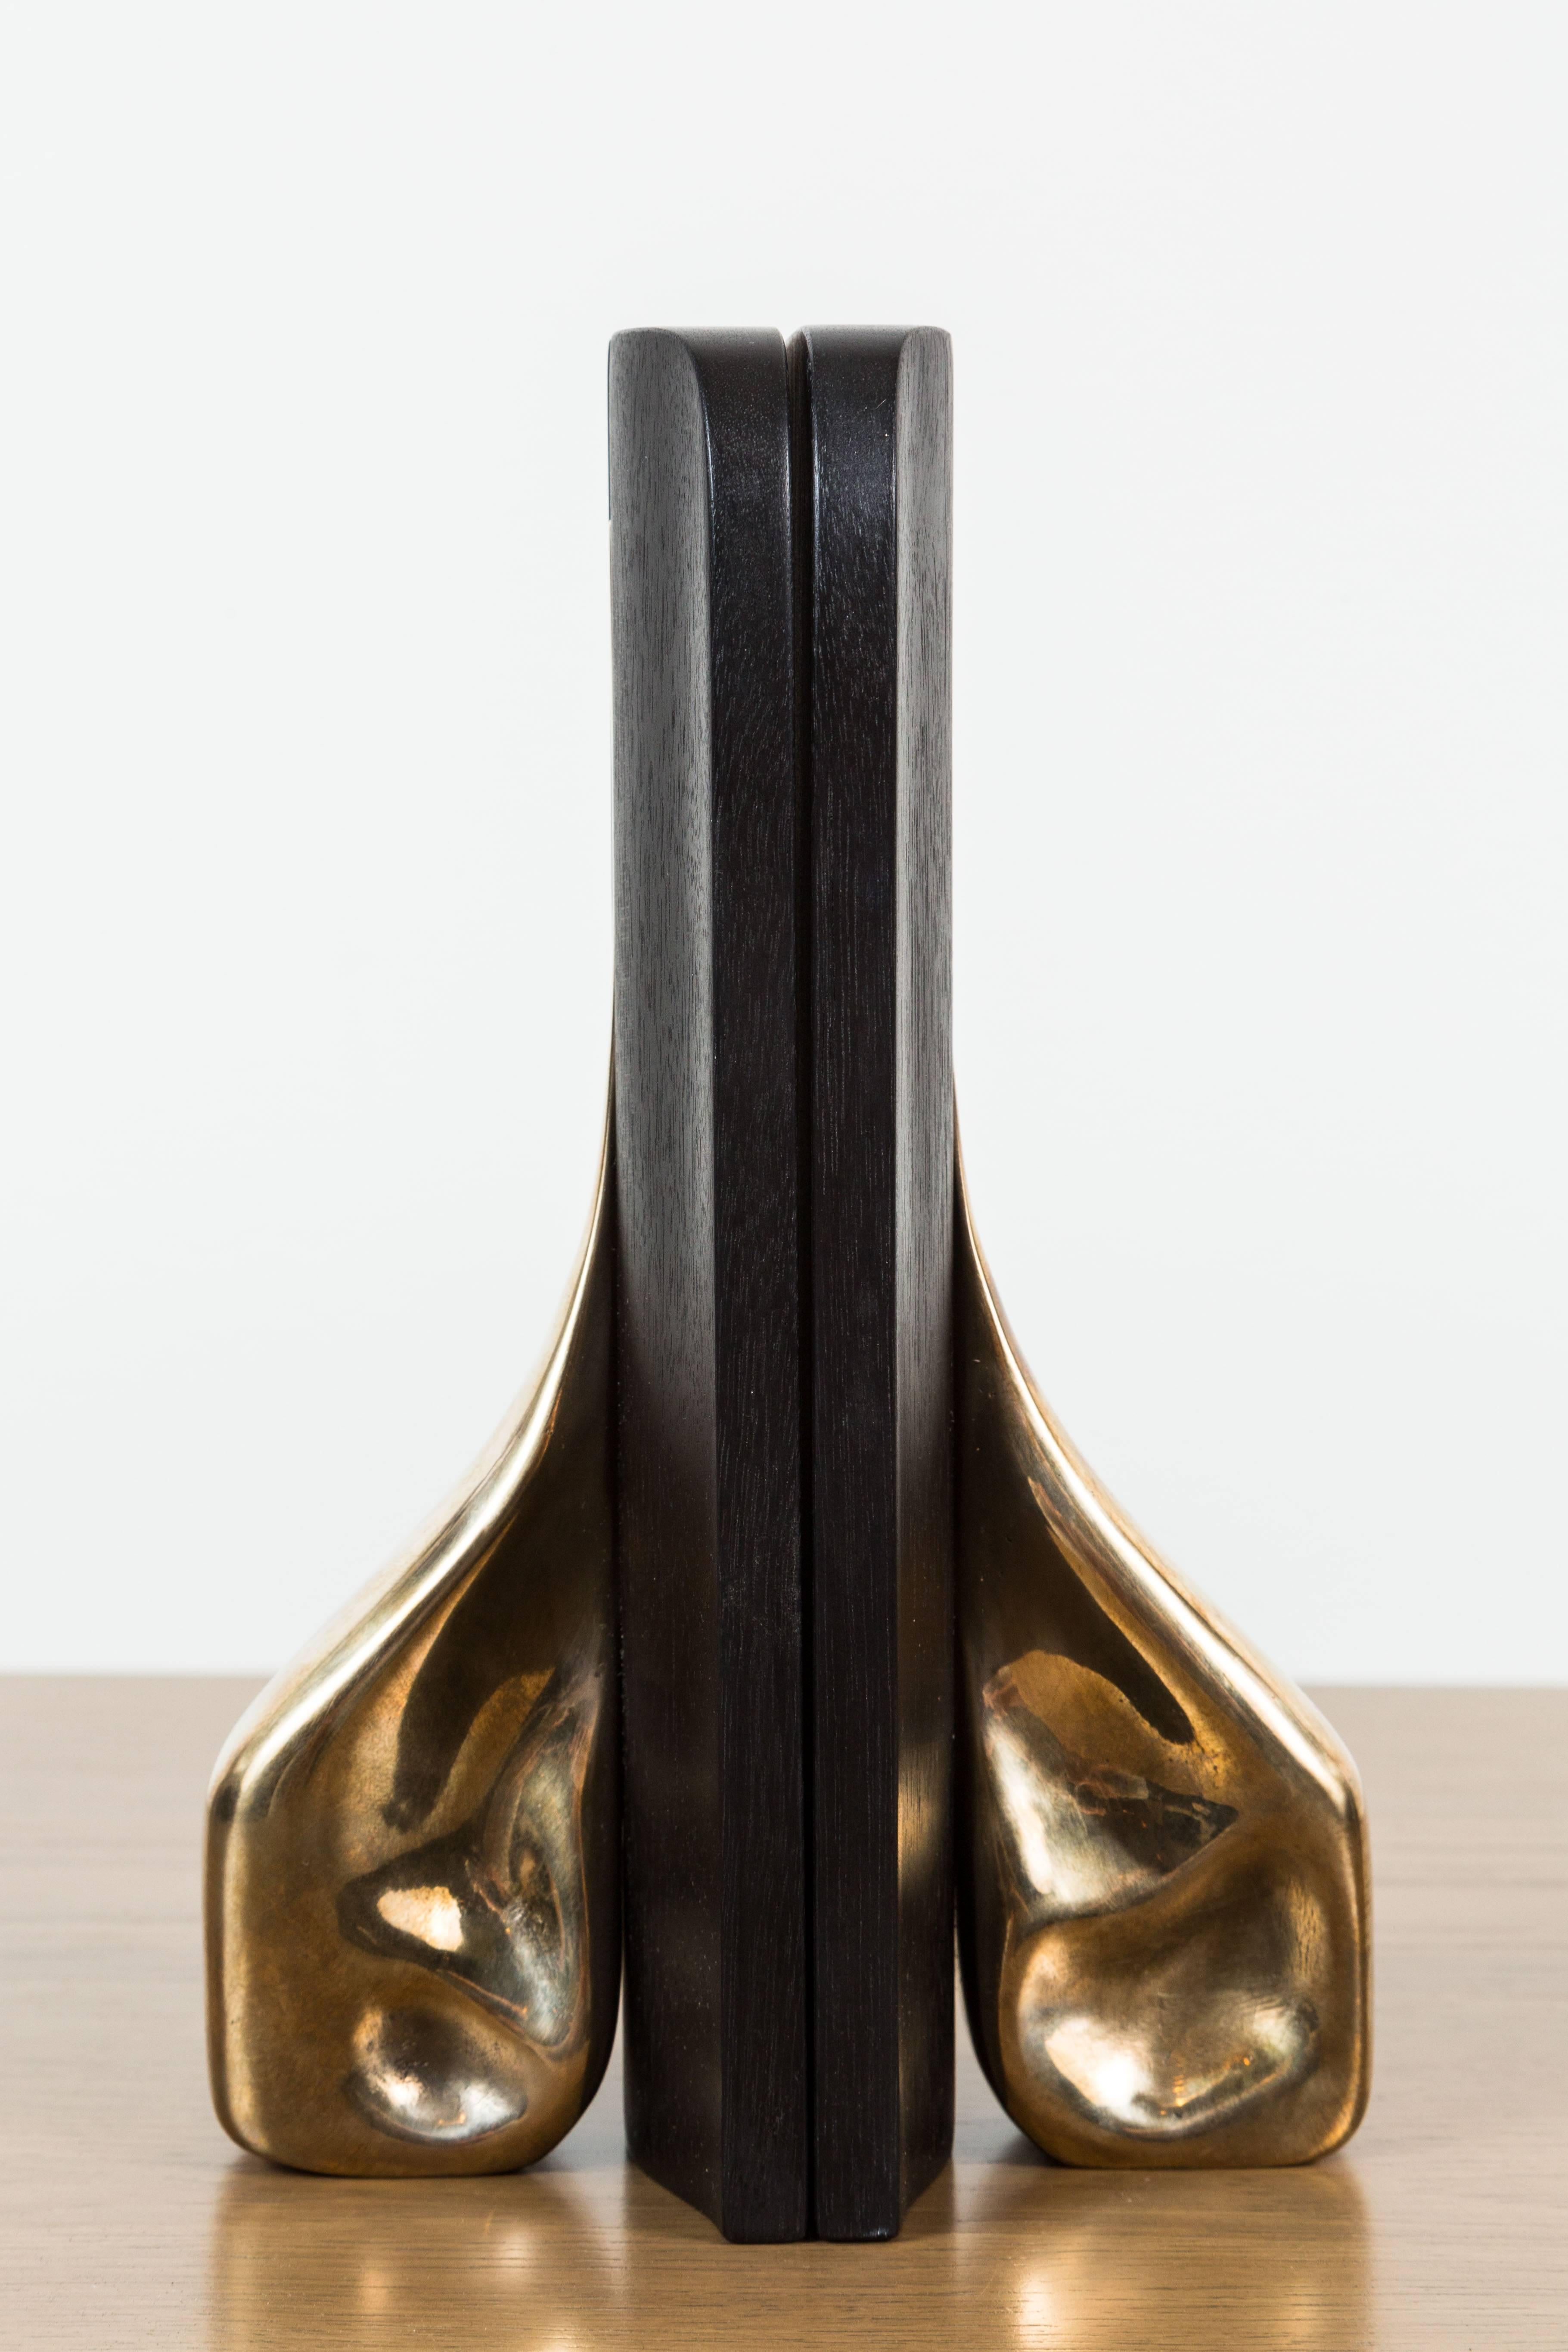 American Pair of Black Walnut and Cast Bronze Bookends by Vincent Pocsik, in Stock